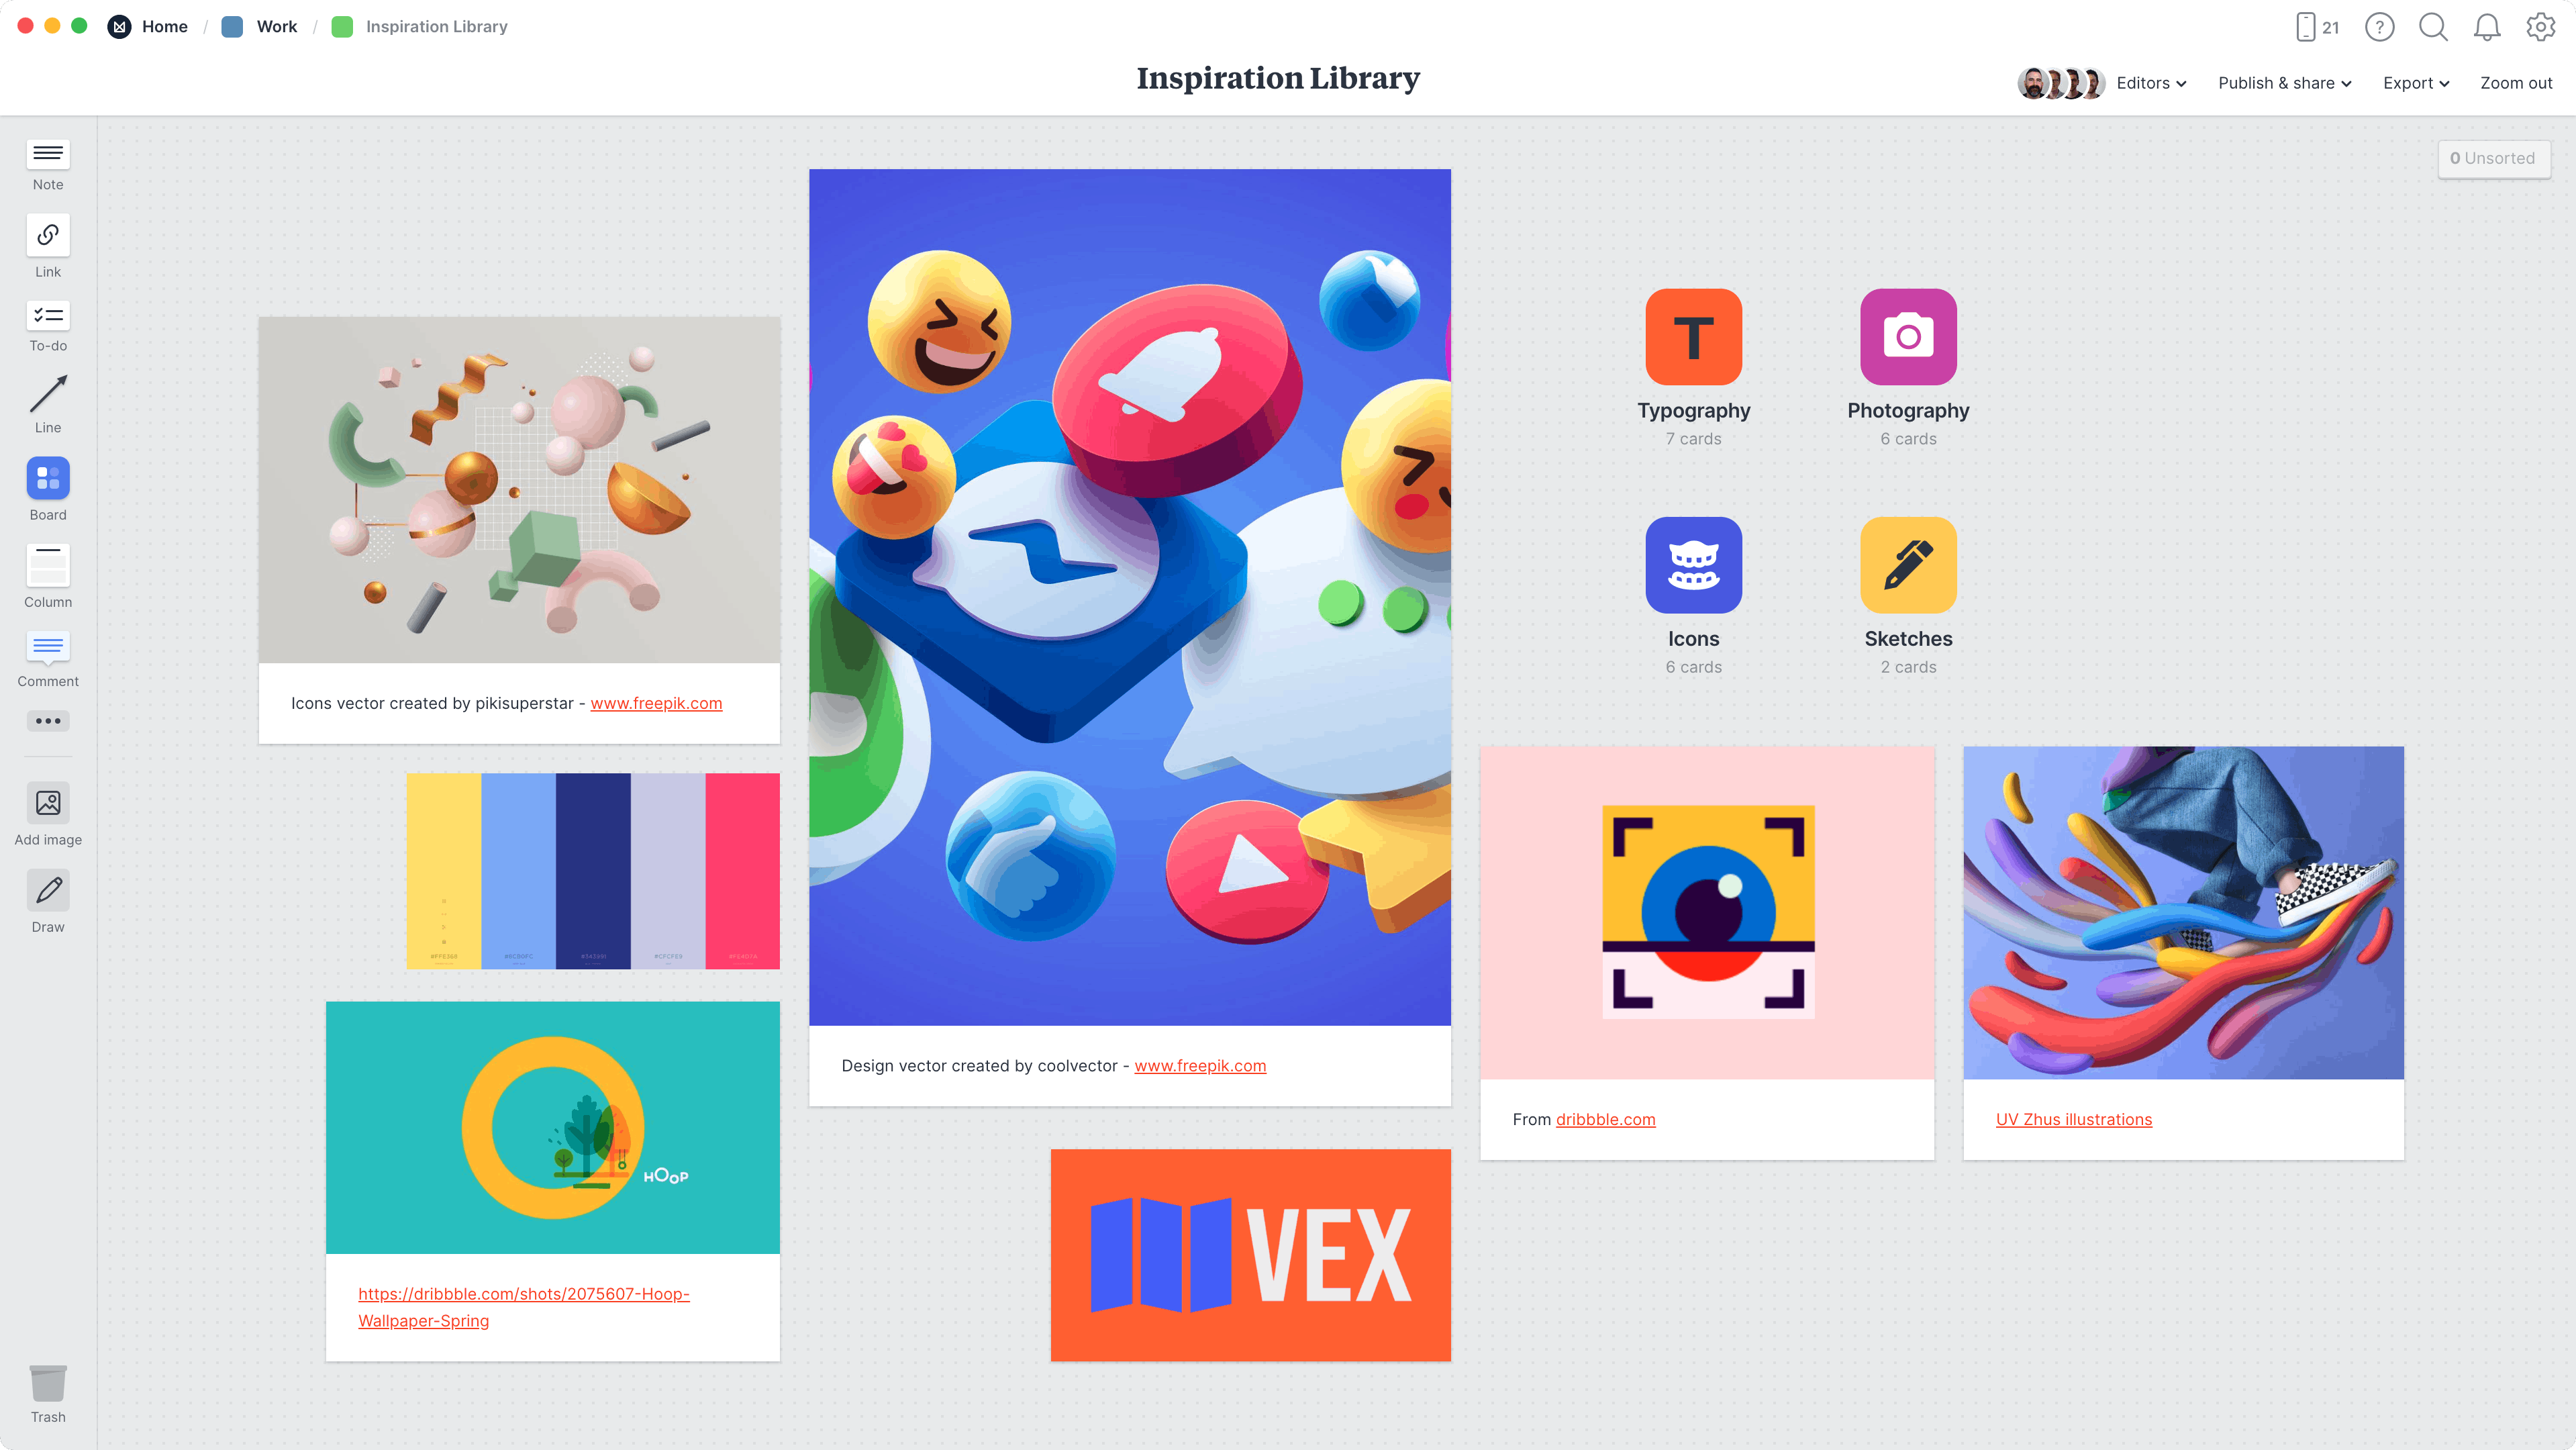 Inspiration Library Template, within the Milanote app